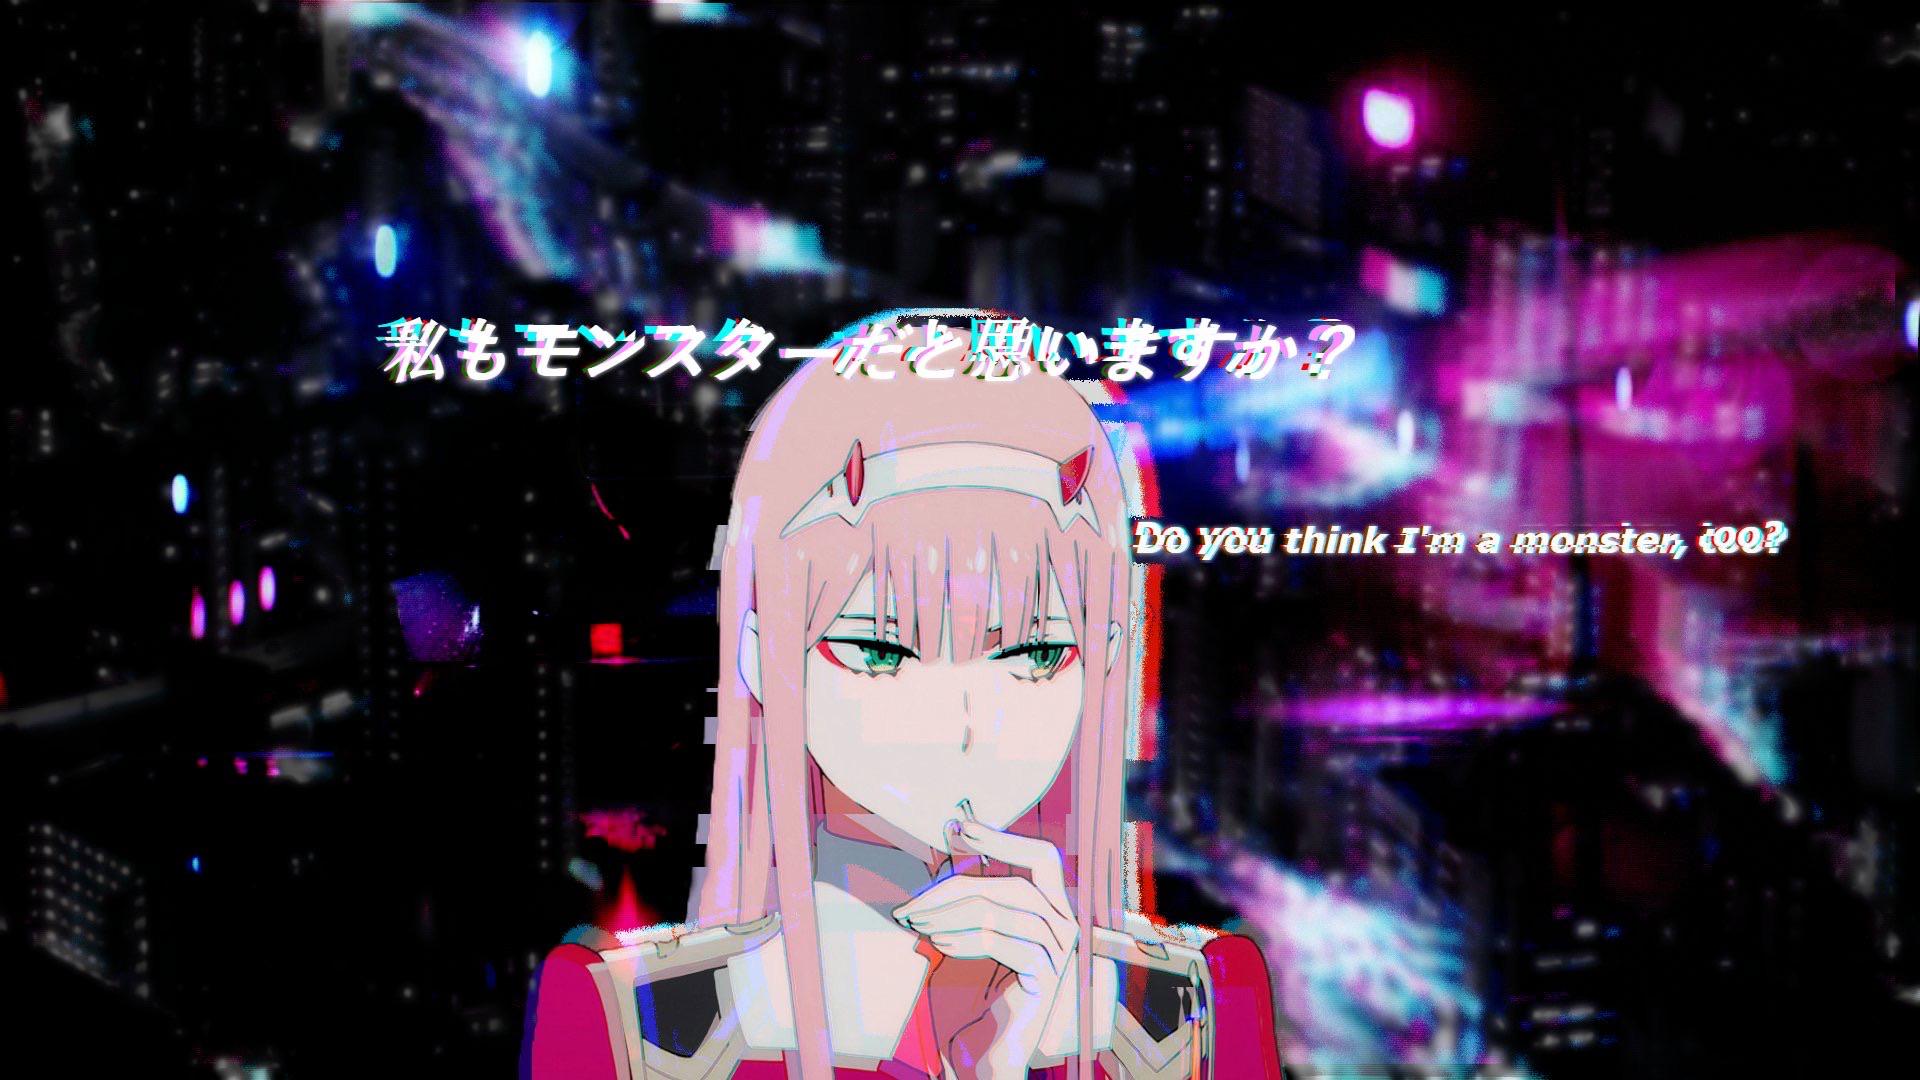 wallpaper I made [Darling in the Franxx] (1920x1080)